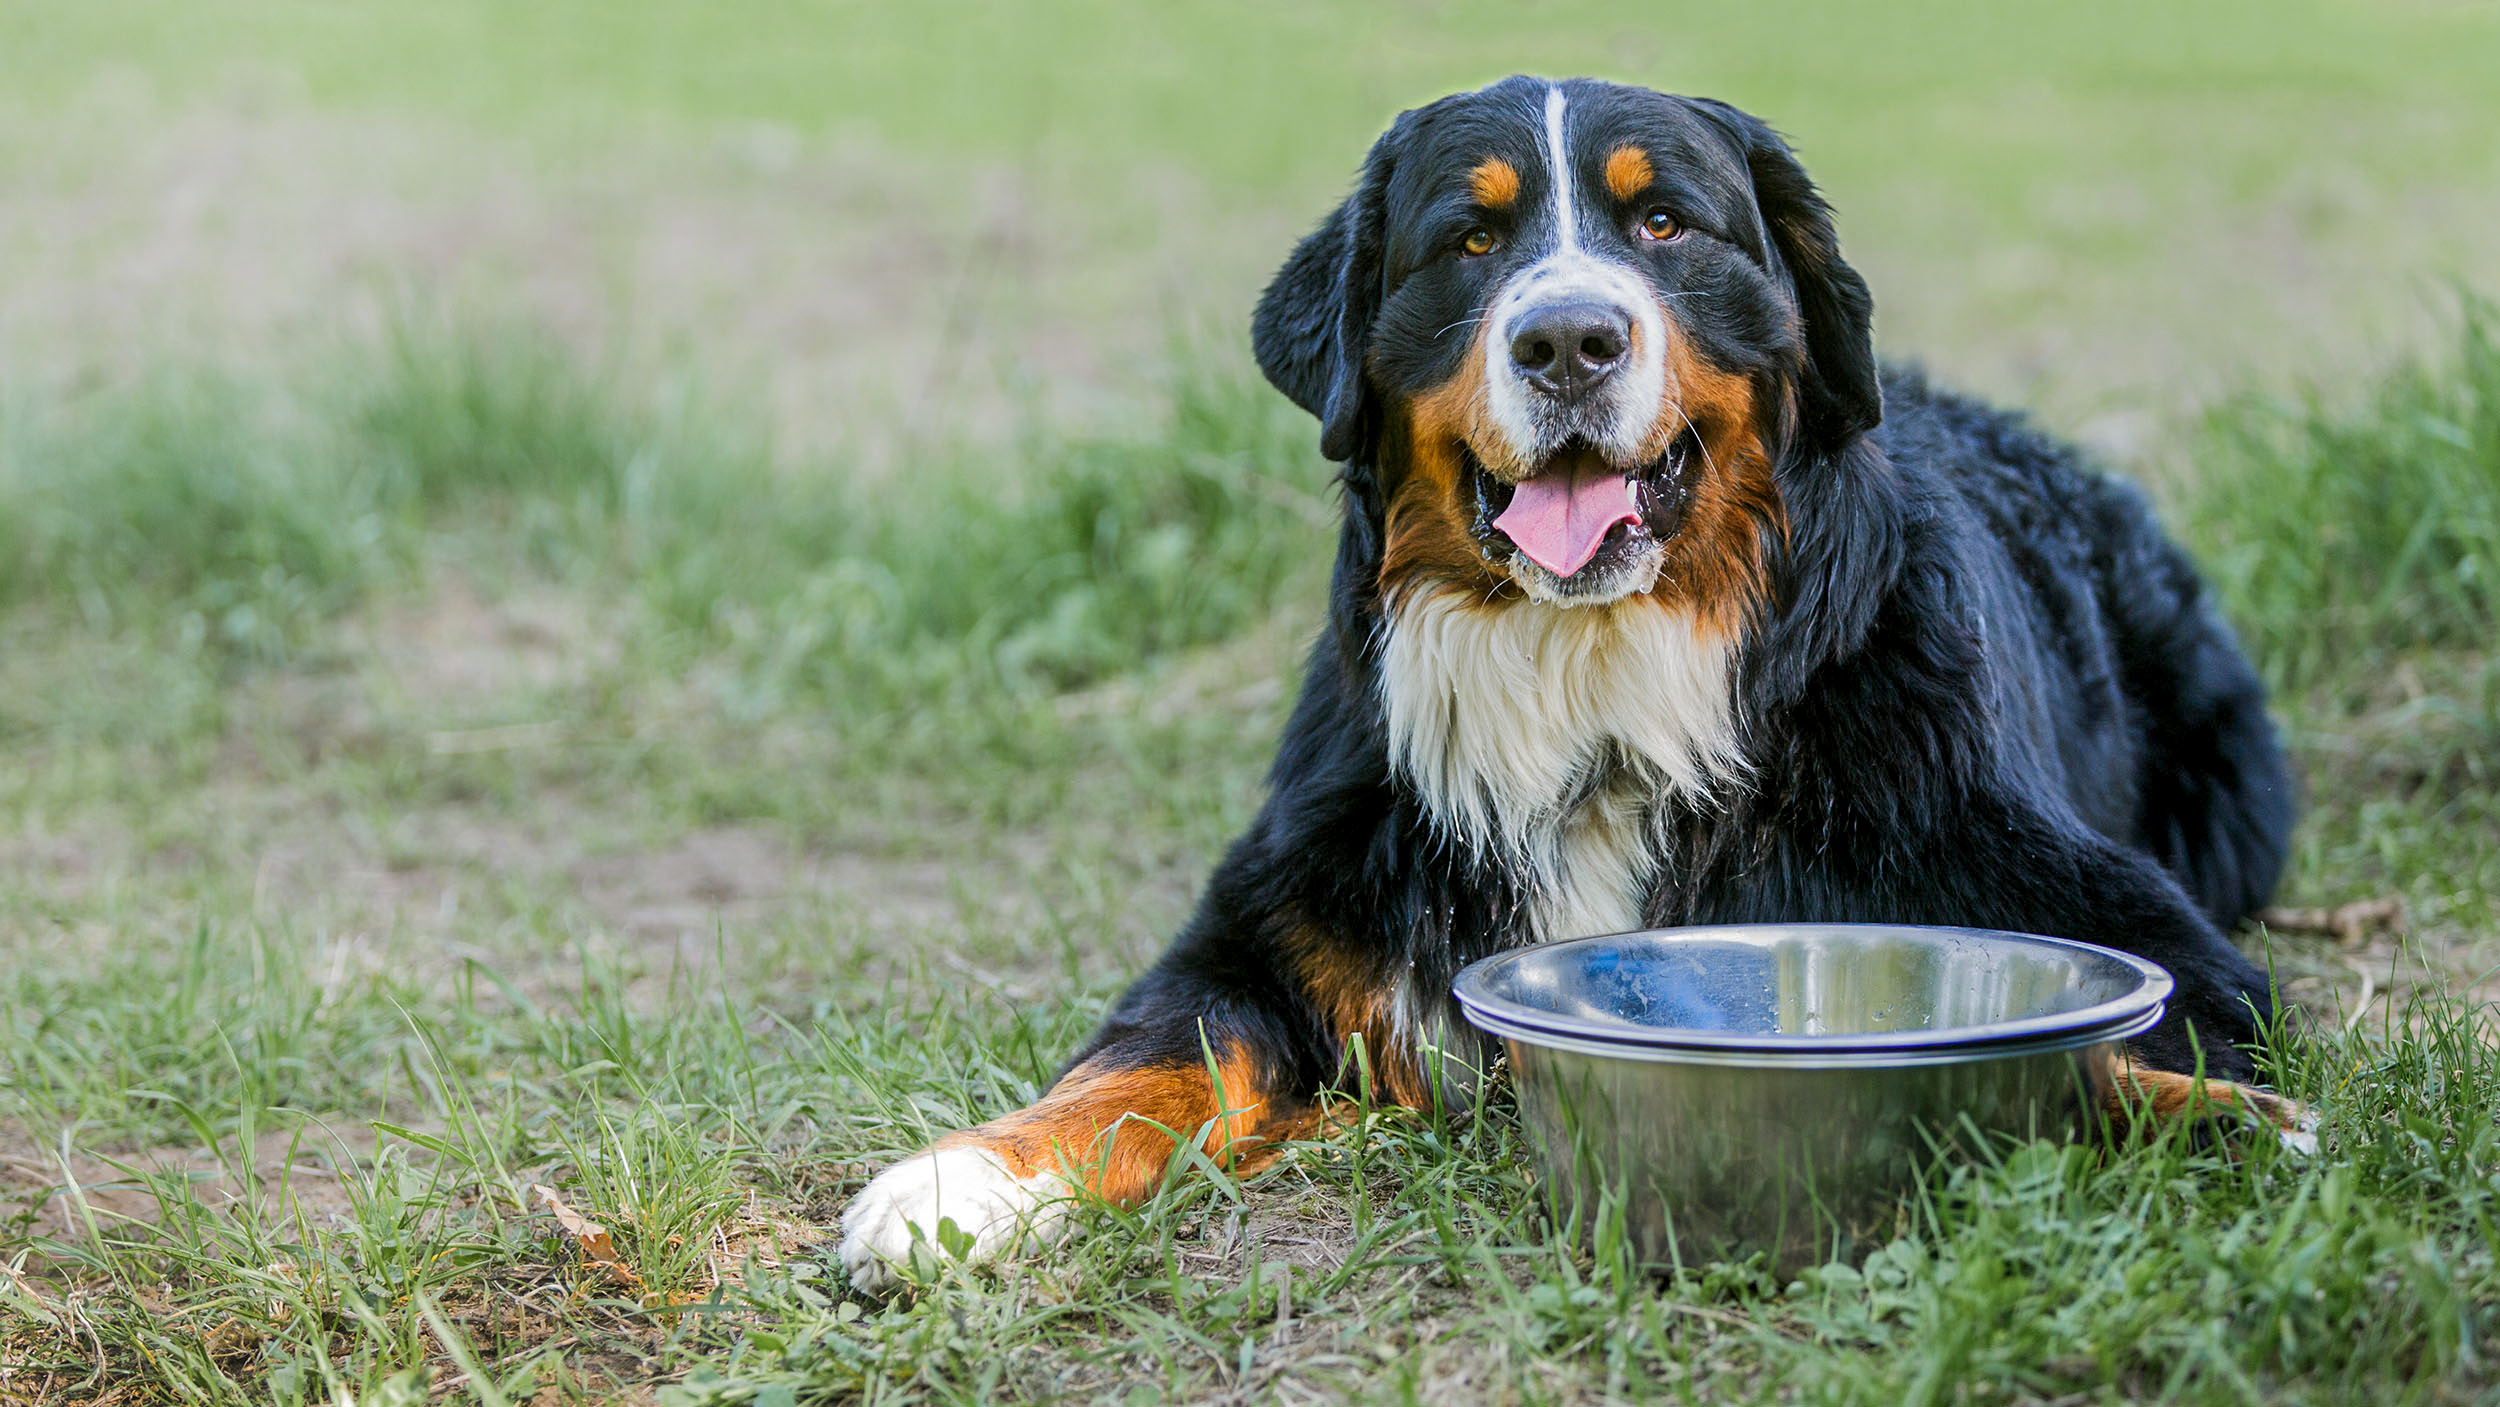 Adult Bernese Mountain Dog lying down on grass next to a silver bowl.